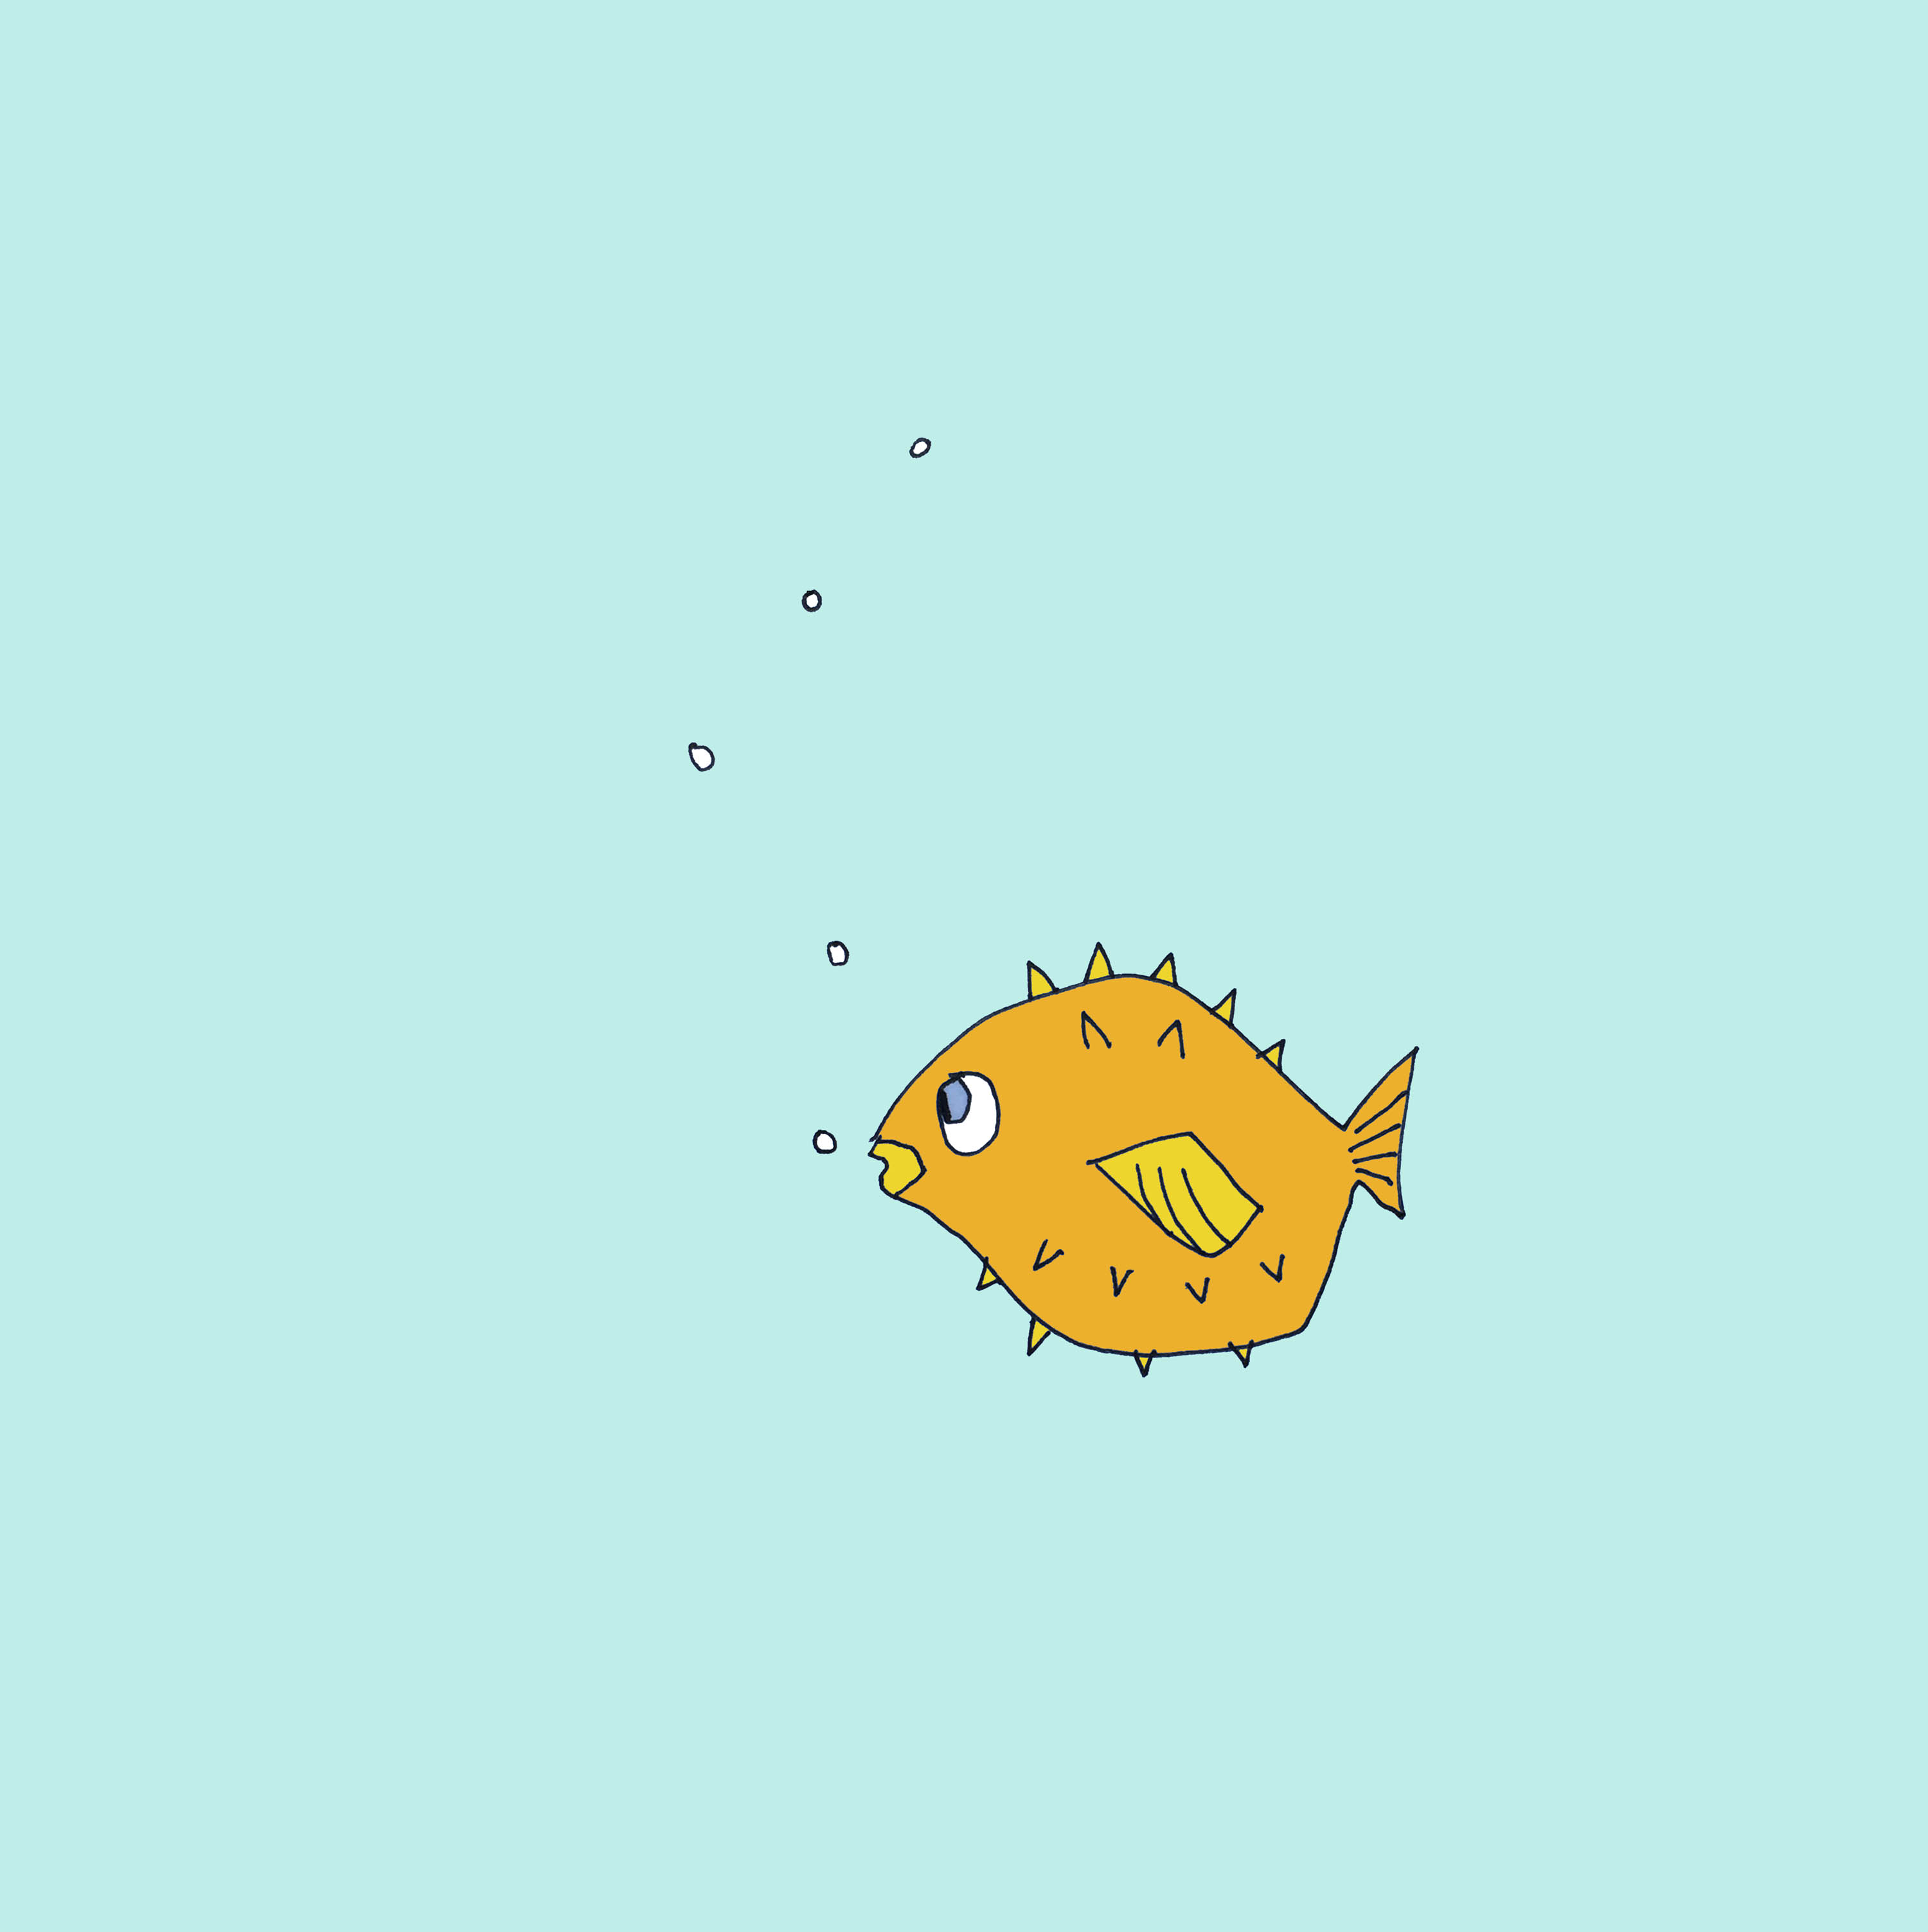 art every day number 101 / illustration / drawing / getting on with it (as would a fish)